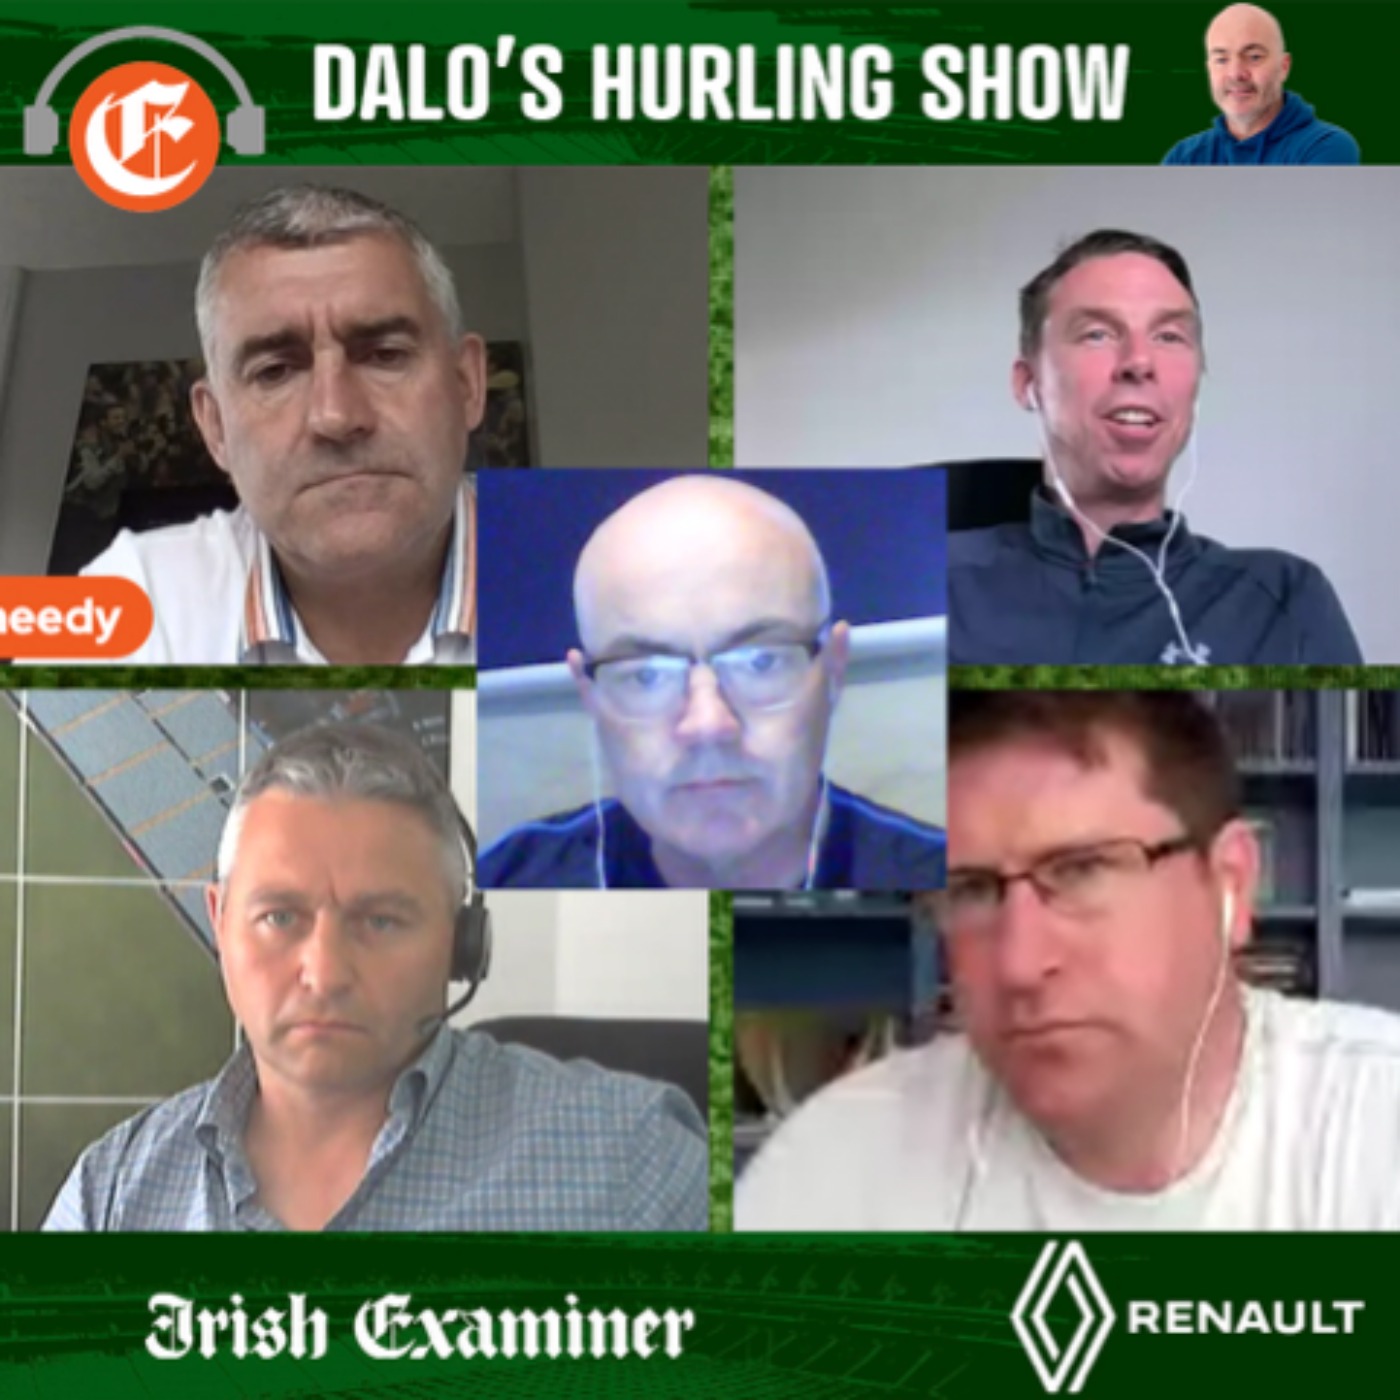 Dalo’s All Ireland Hurling Final Preview: Cody v Kiely, the clash of styles, Lynch injury doubt, impacts off the bench and much more!